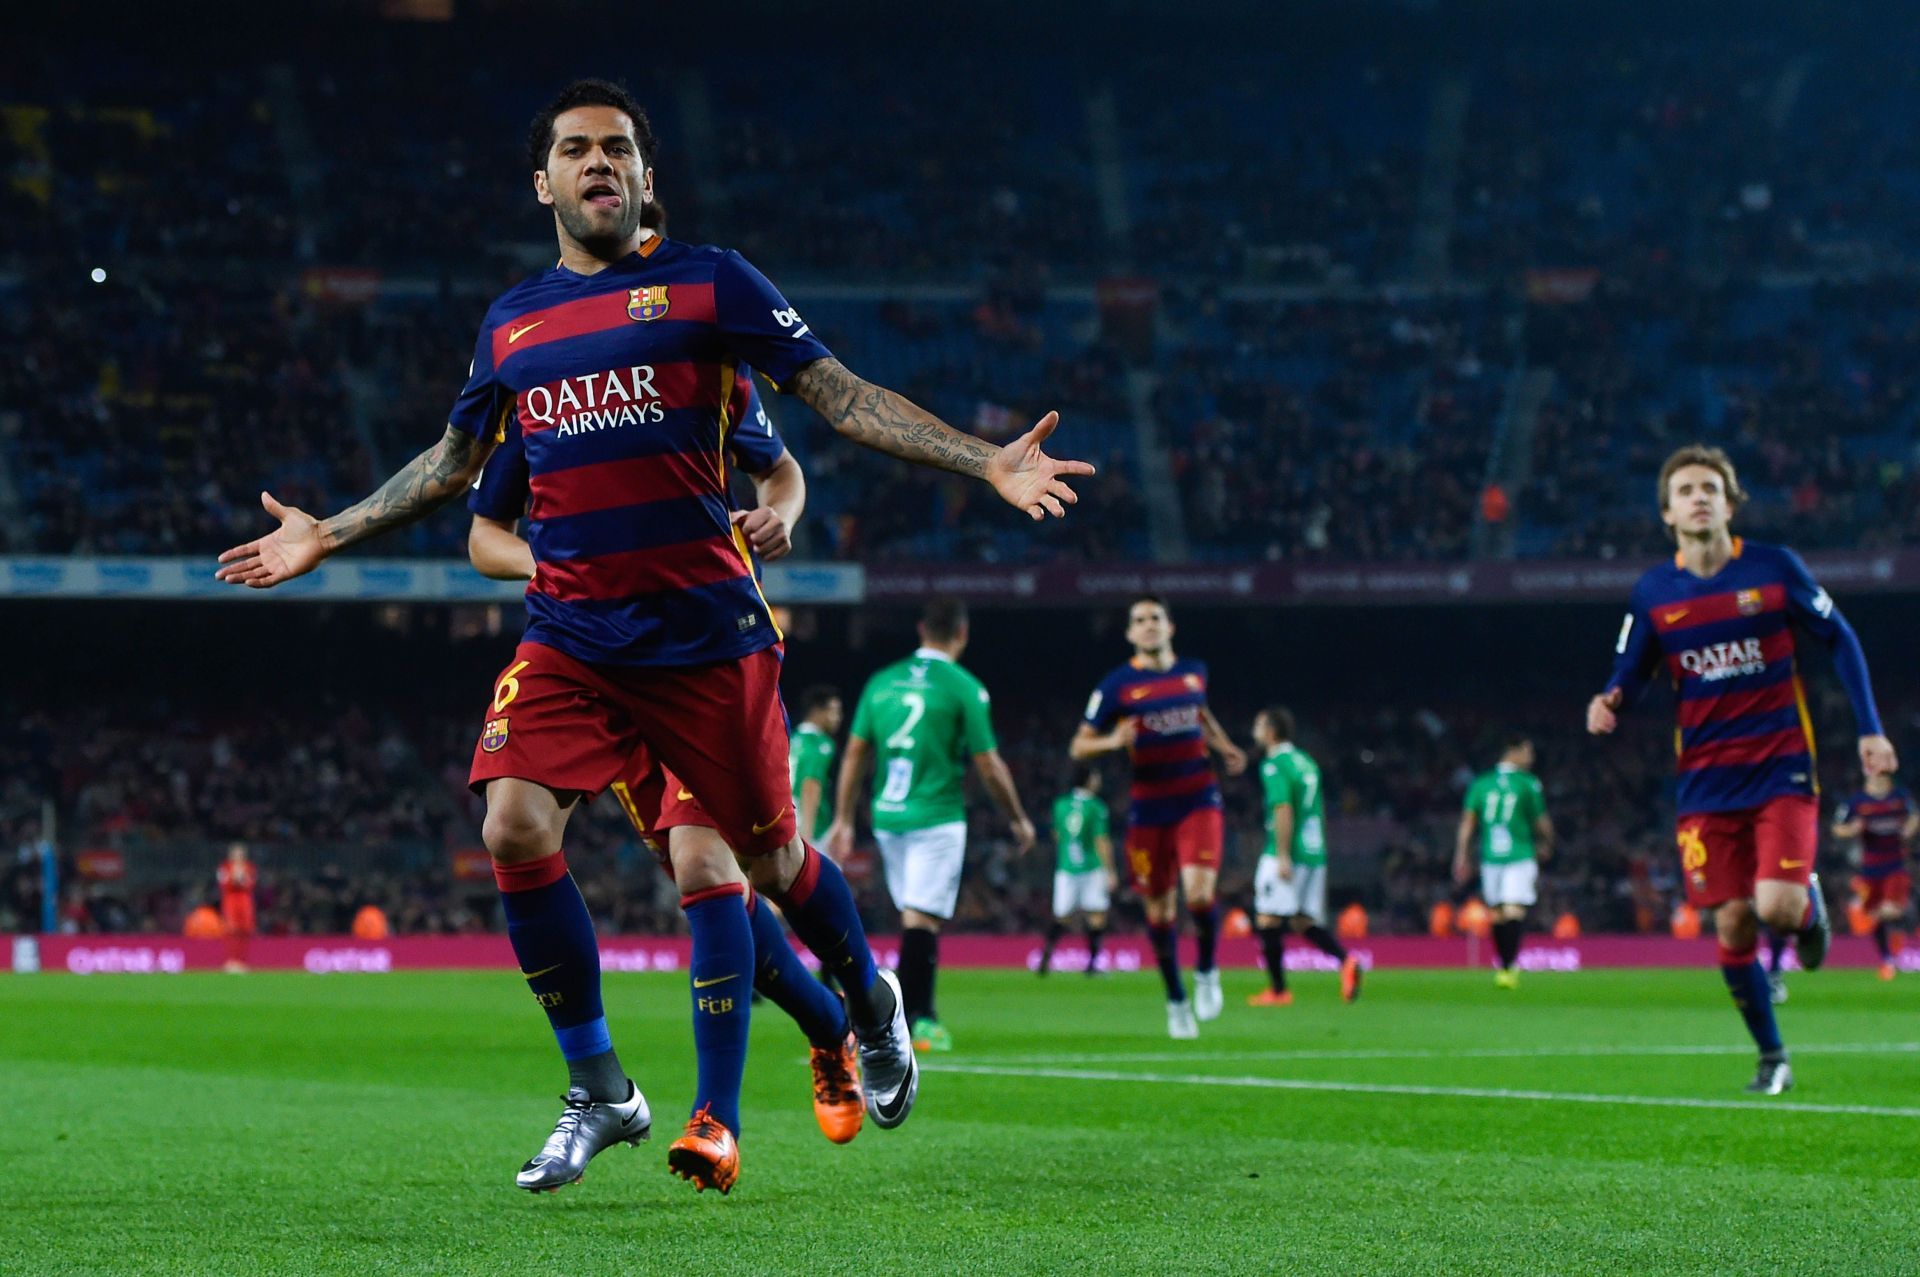 Dani Alves enjoyed a prolific stint in the Champions League.